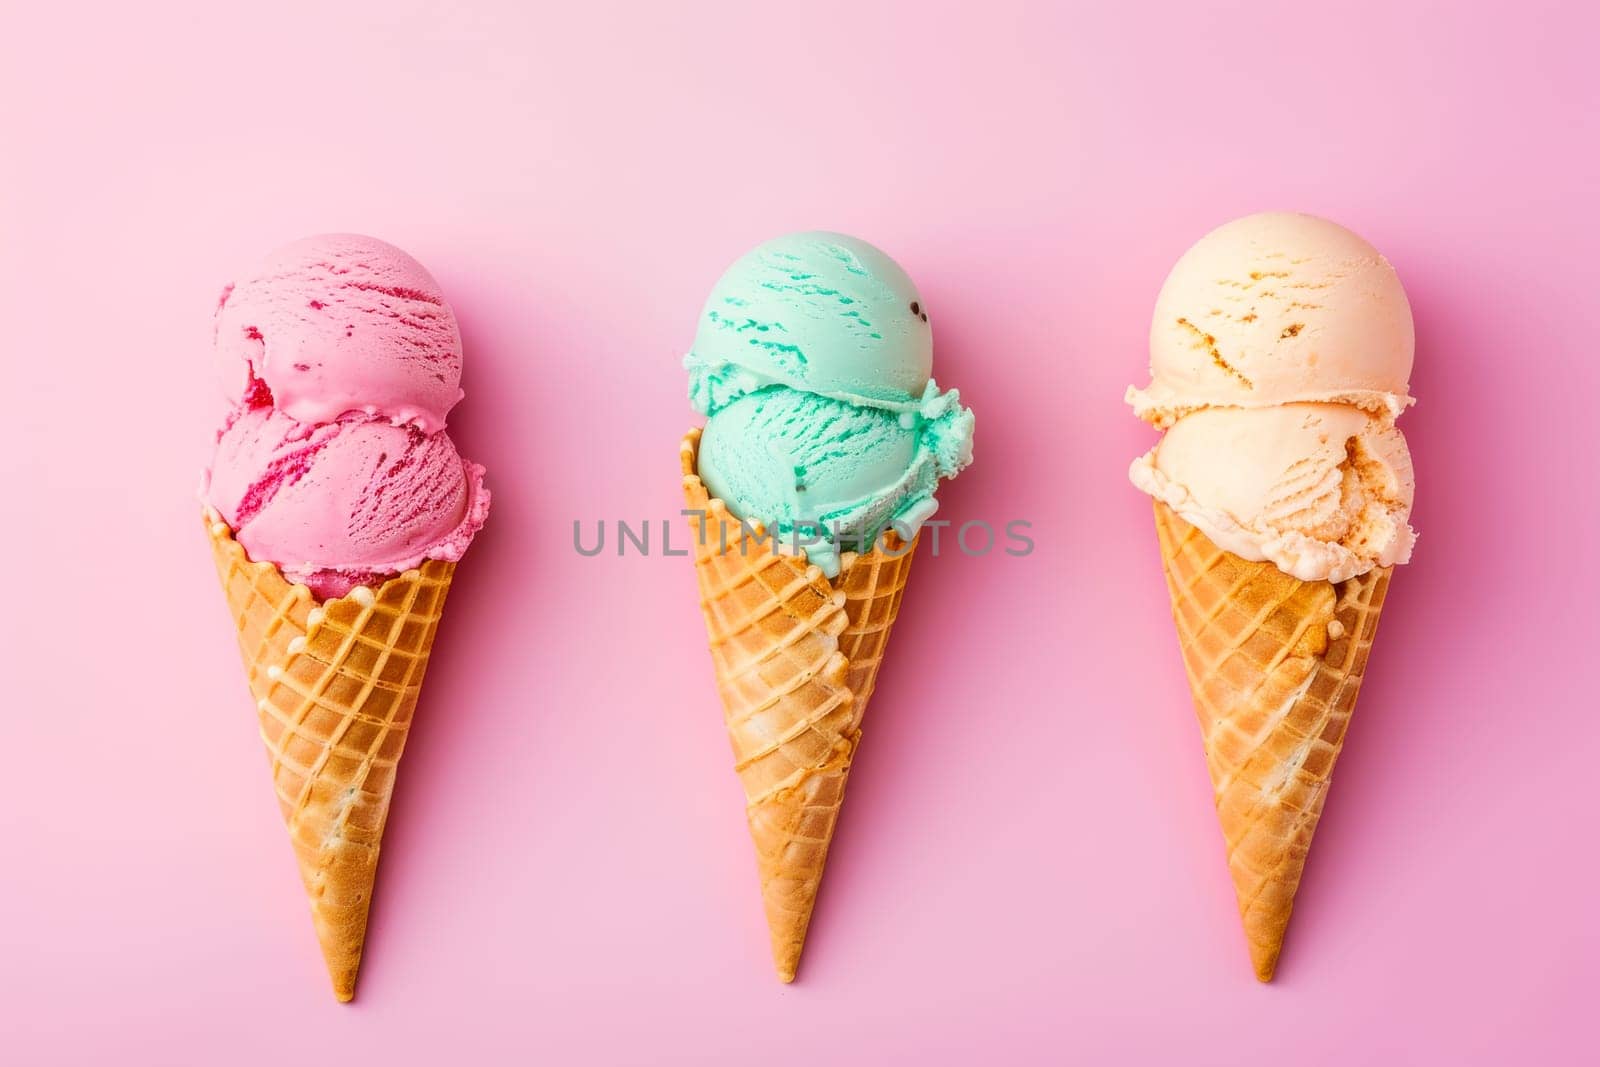 Three ice cream cones displayed on a pastel pink background, creating a sweet and colorful composition.